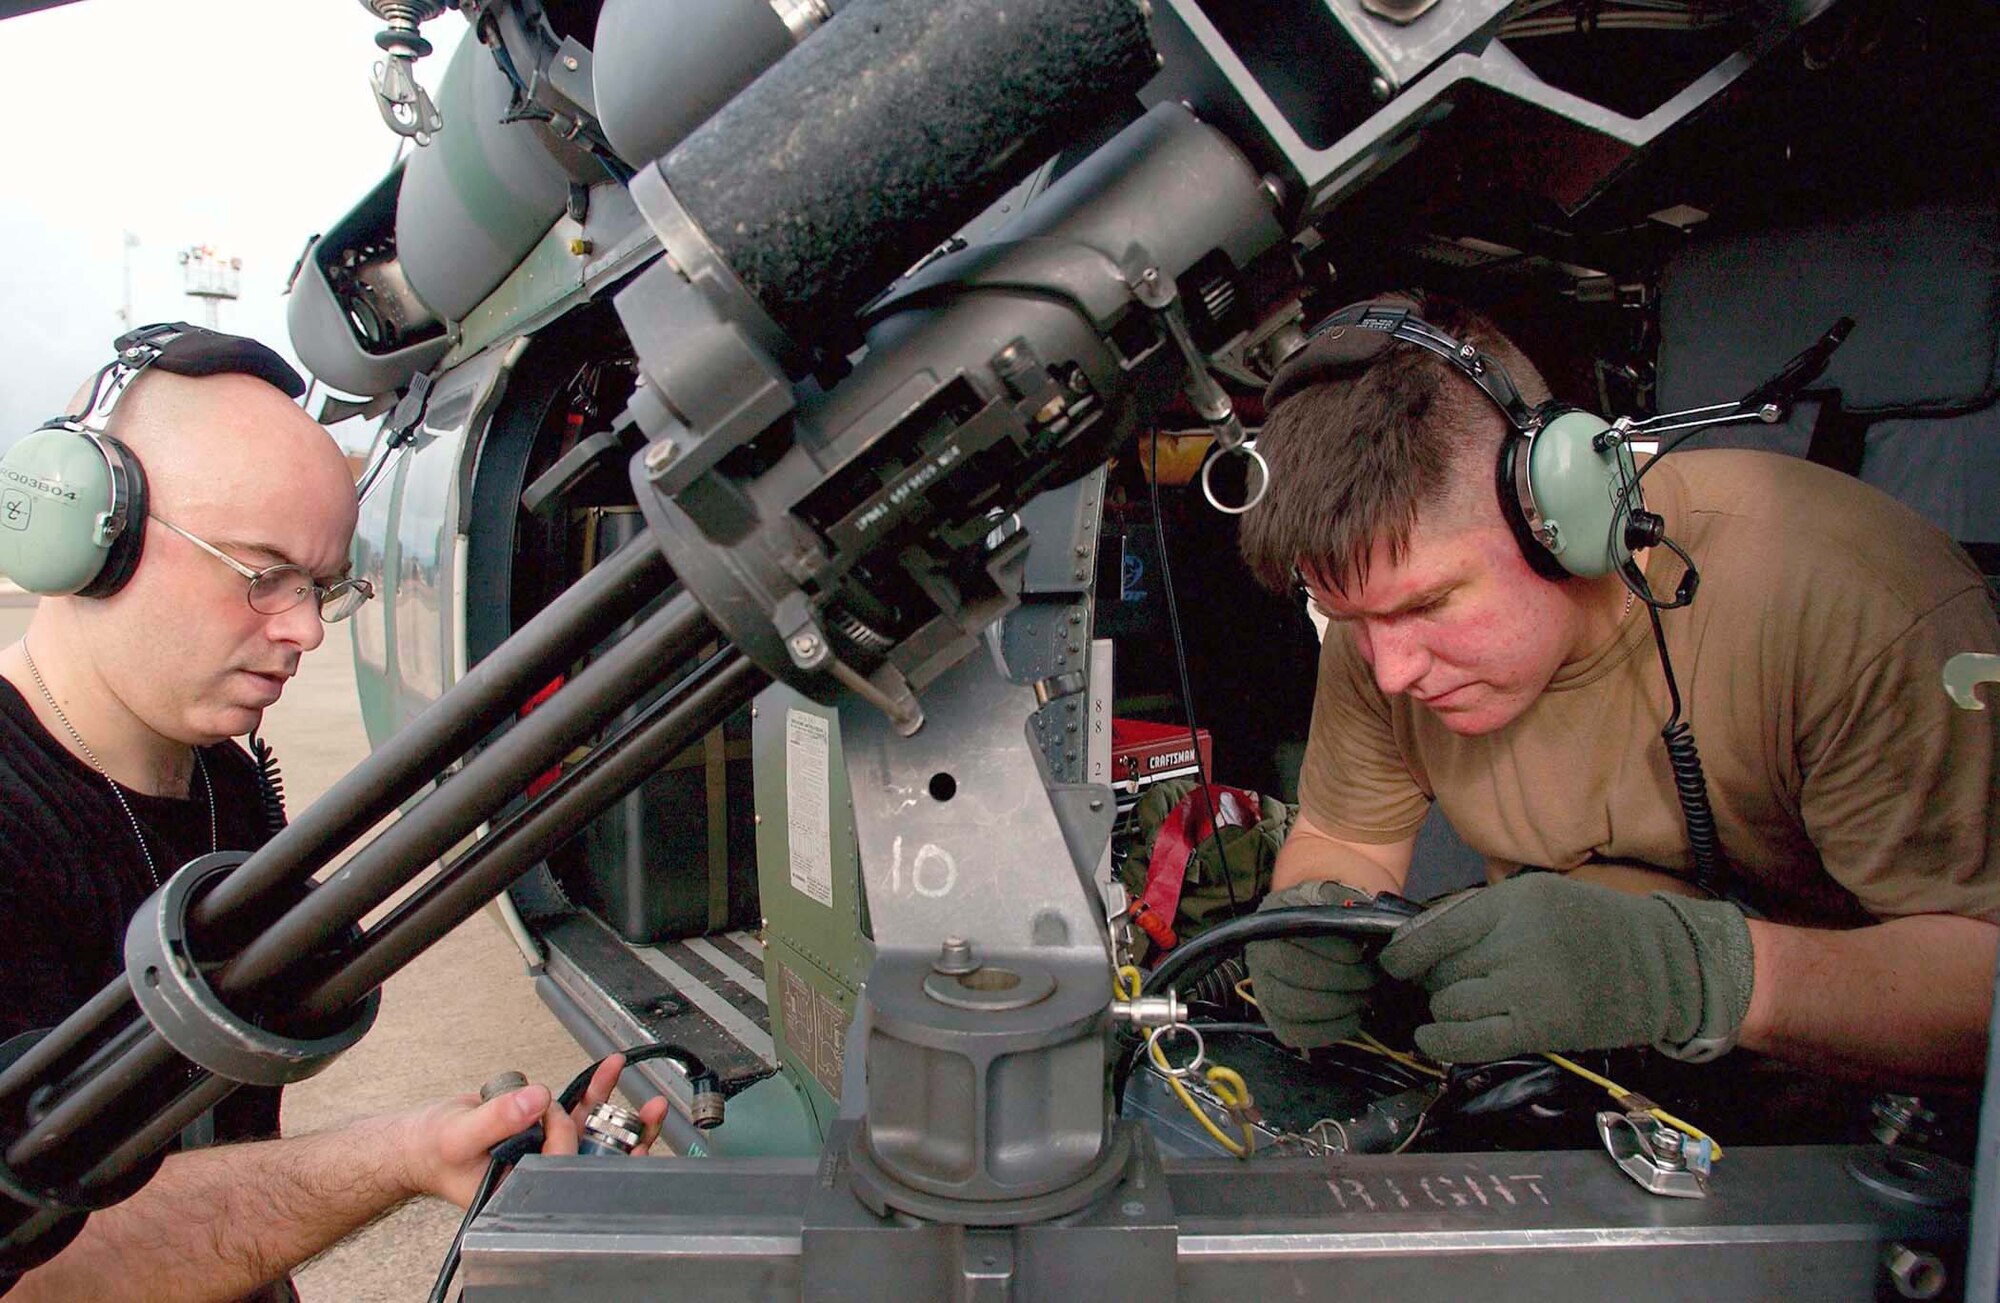 LUNGI, Sierra Leone -- Tech. Sgt. Todd Bailey (left) and Staff Sgt. Matthew Kelly work on a GAU-2 minigun mounted on an HH-60G Pave Hawk helicopter here.  They are deployed from the 85th Maintenance Squadron at Naval Air Station Keflavik, Iceland.  (U.S. Air Force photo by Tech. Sgt. Justin D. Pyle)